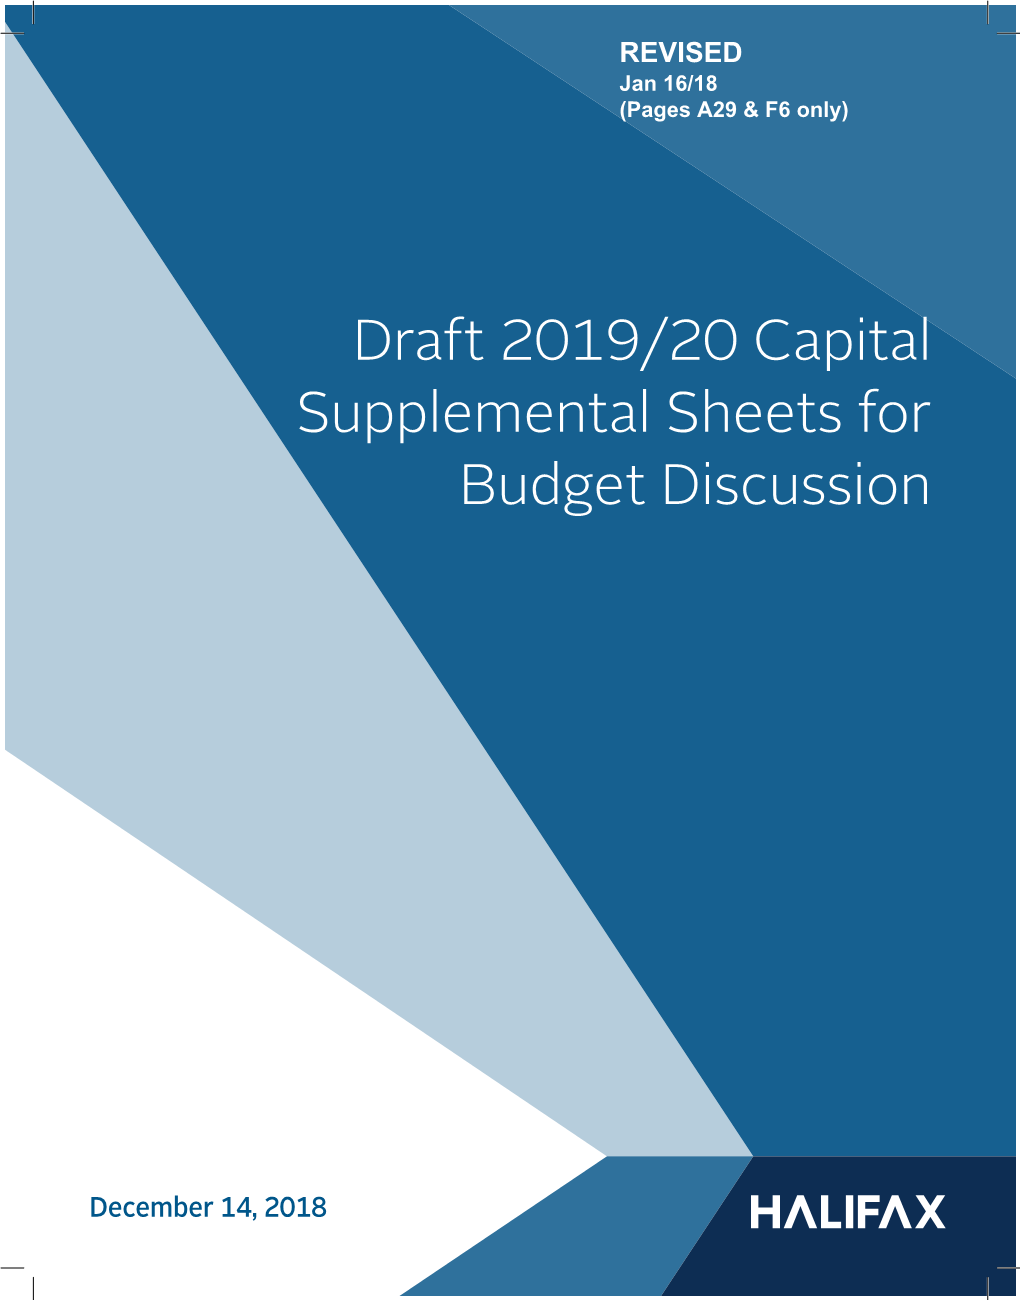 Draft 2019/20 Capital Supplemental Sheets for Budget Discussion